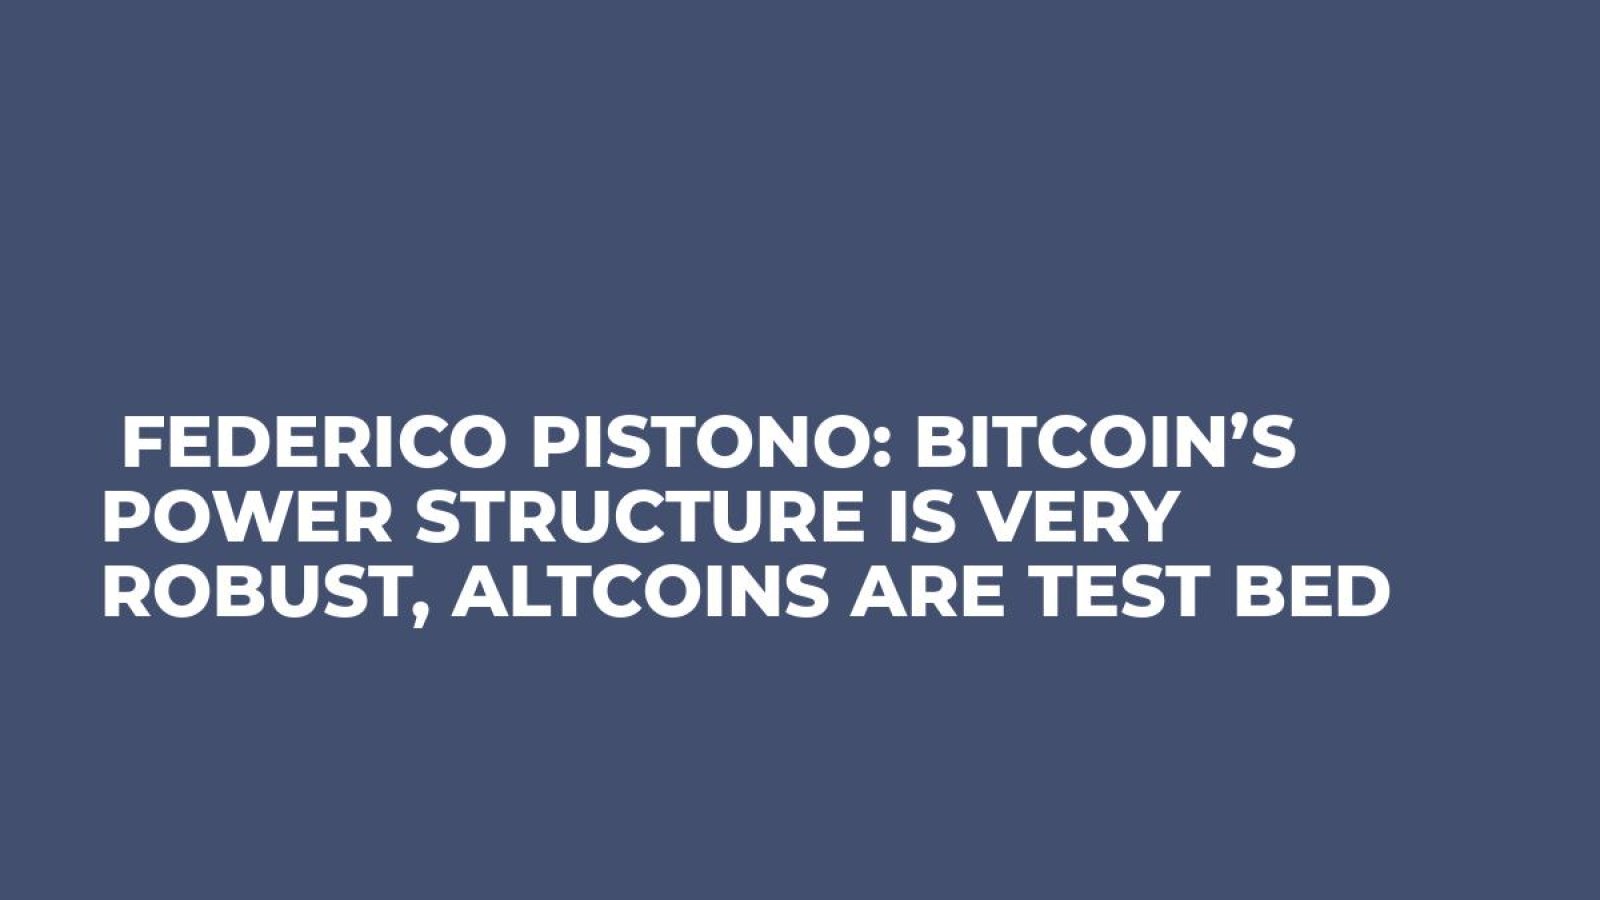  Federico Pistono: Bitcoin’s Power Structure is Very Robust, Altcoins Are Test Bed